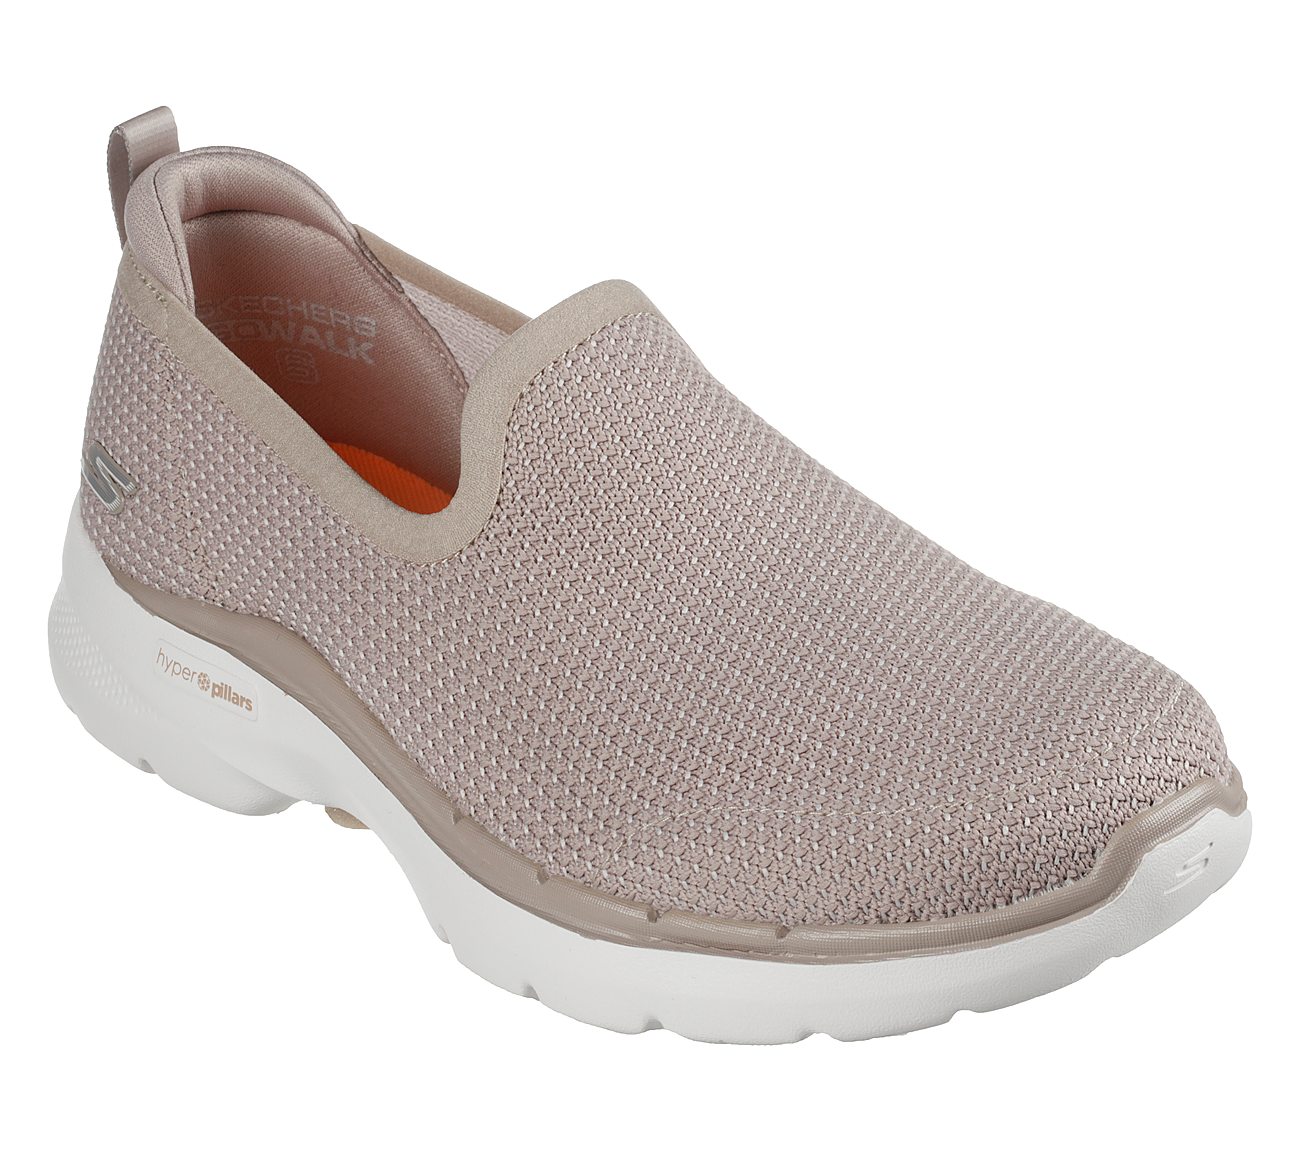 GO WALK 6 - CLEAR VIRTUE, NATURAL Footwear Lateral View